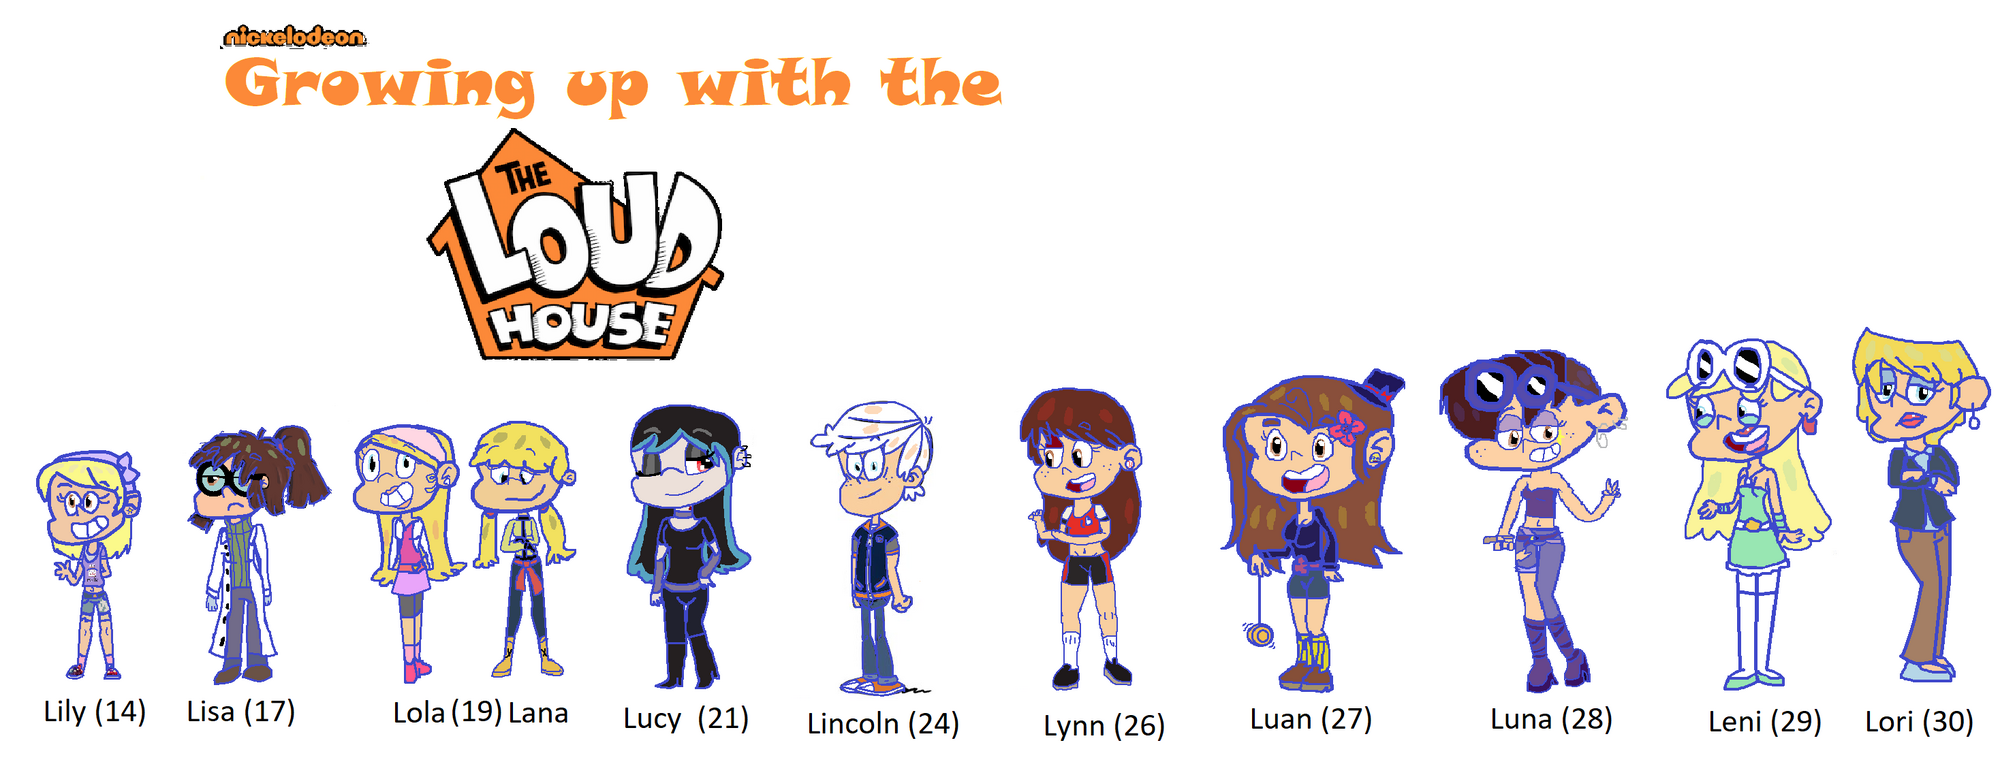 Growing Up With The Loud House The Loud House Fanon Wikia Fandom 2921